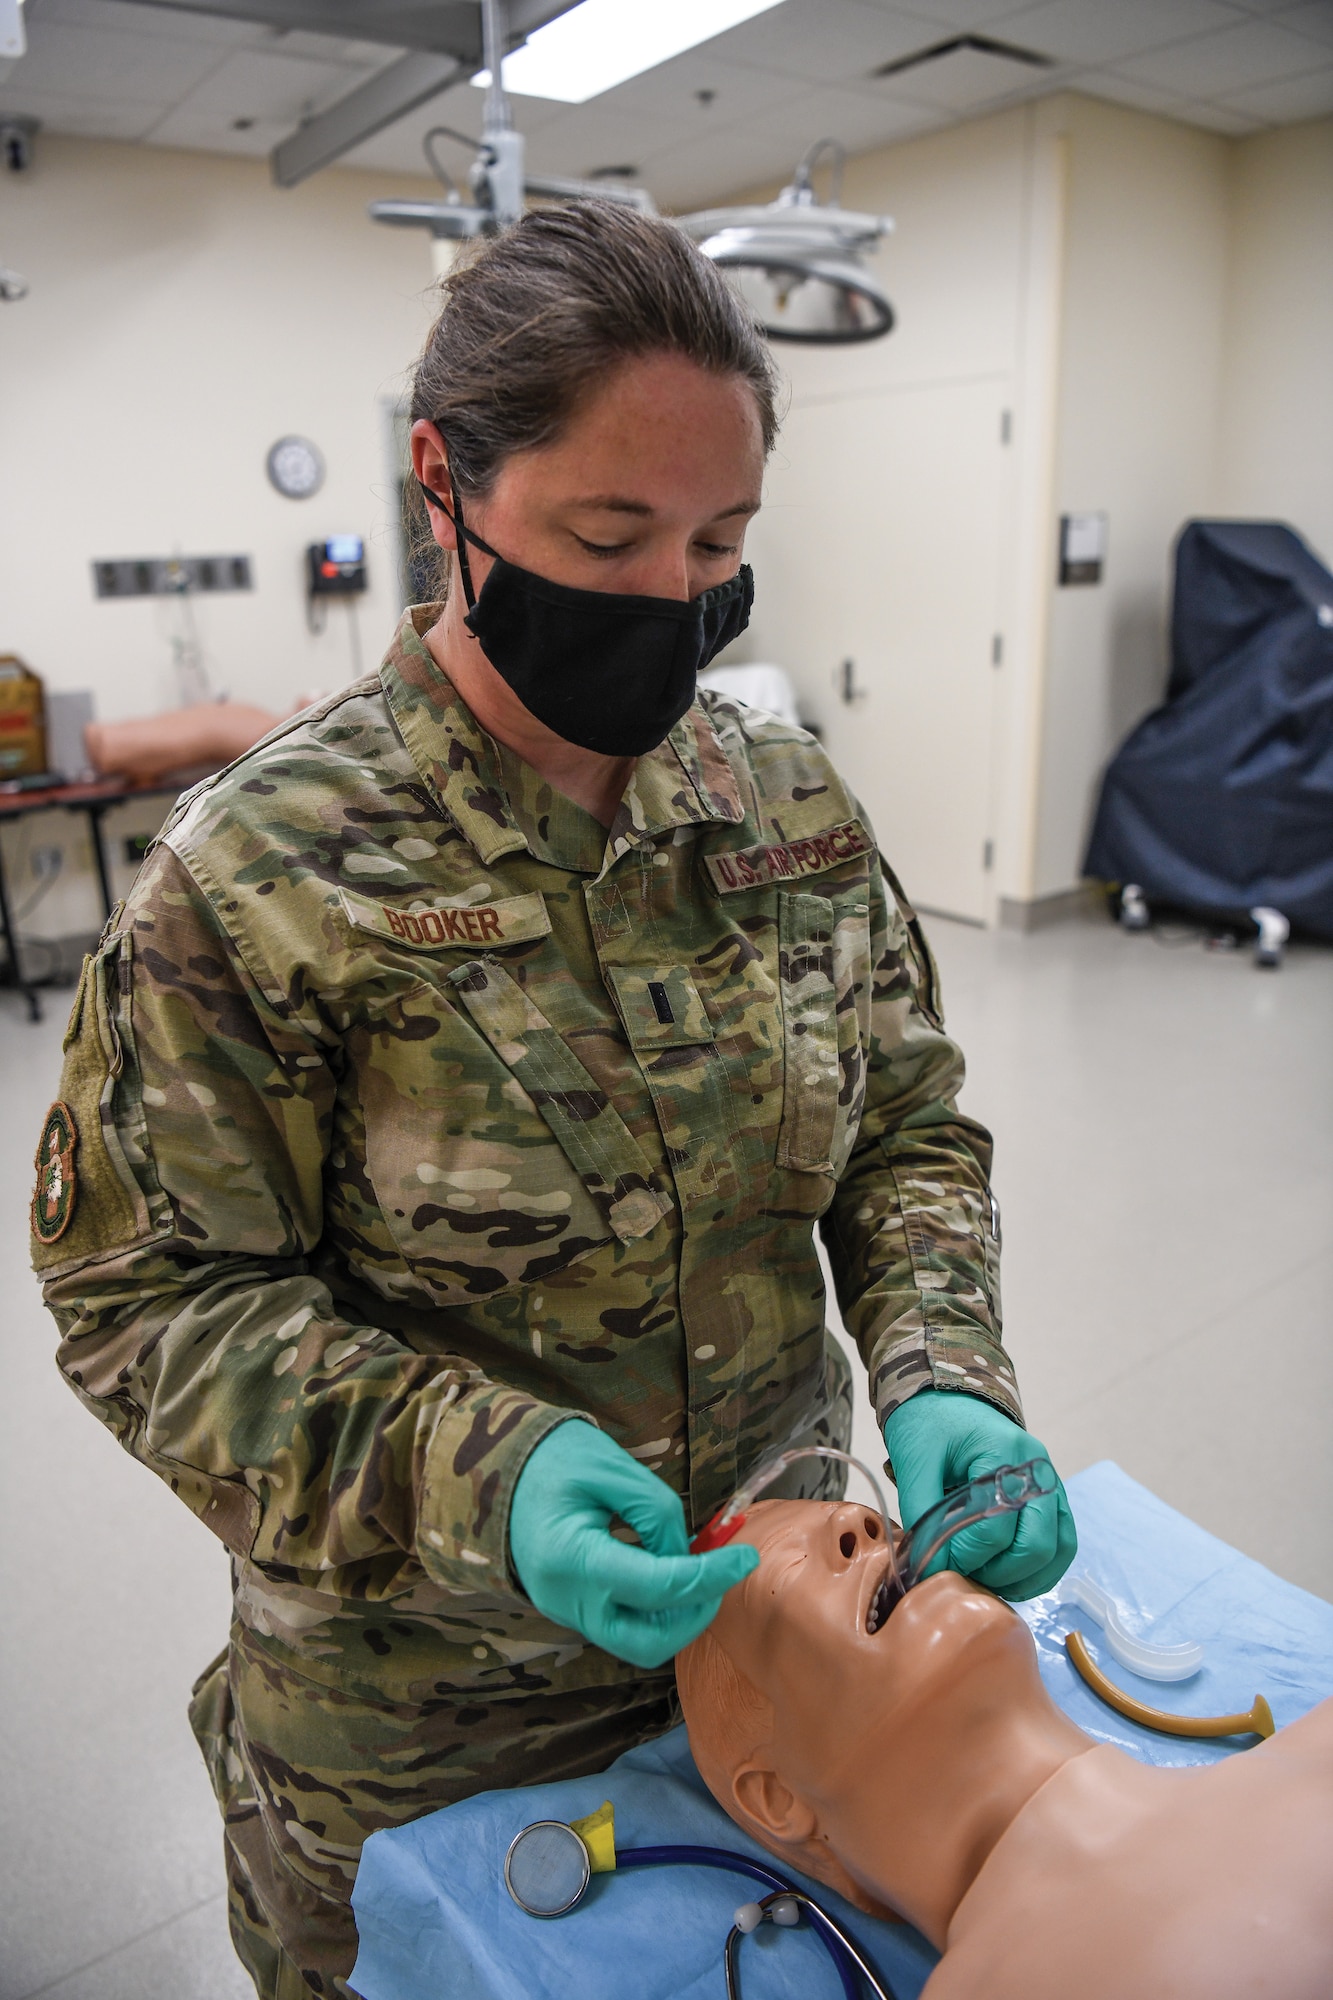 First Lt. Charran Booker, 445th Aeromedical Staging Squadron clinical nurse, applies a nasal pharyngeal to a “patient” for airway management at the Dayton Veterans Affairs Medical facility simulation lab Aug. 6, 2021.